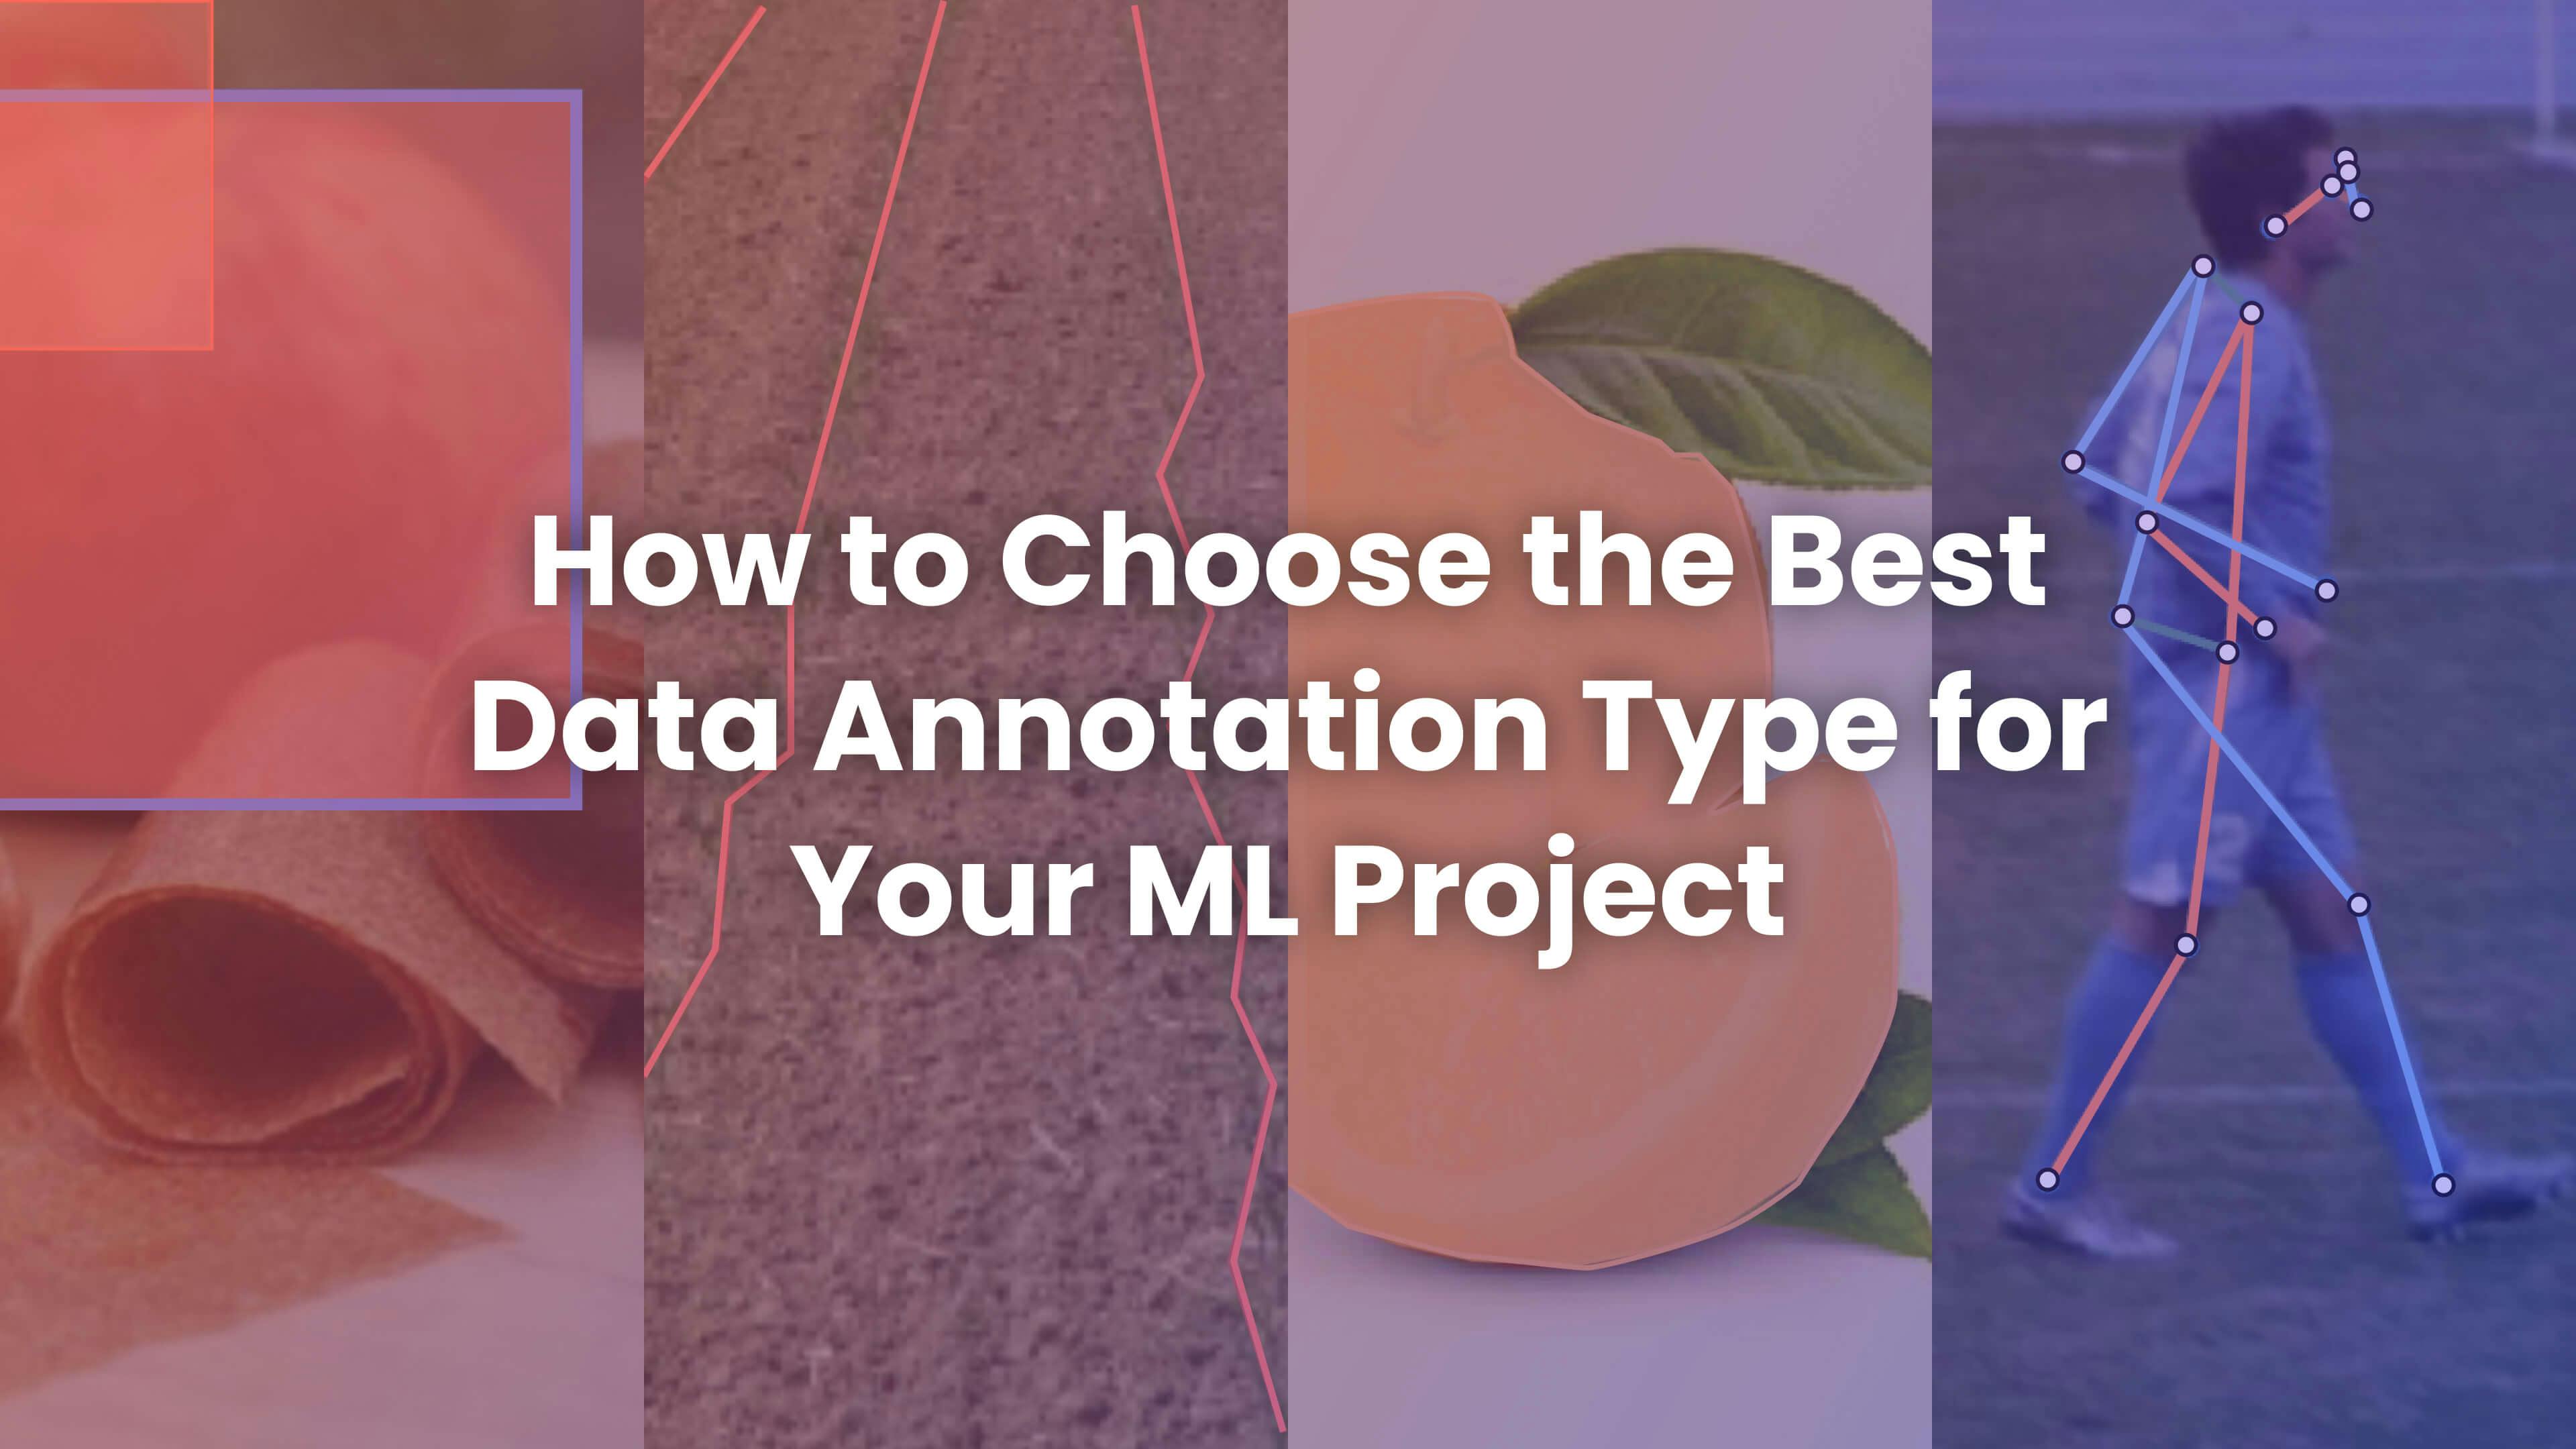 Blog on selecting best data annotation for machine learning projects.